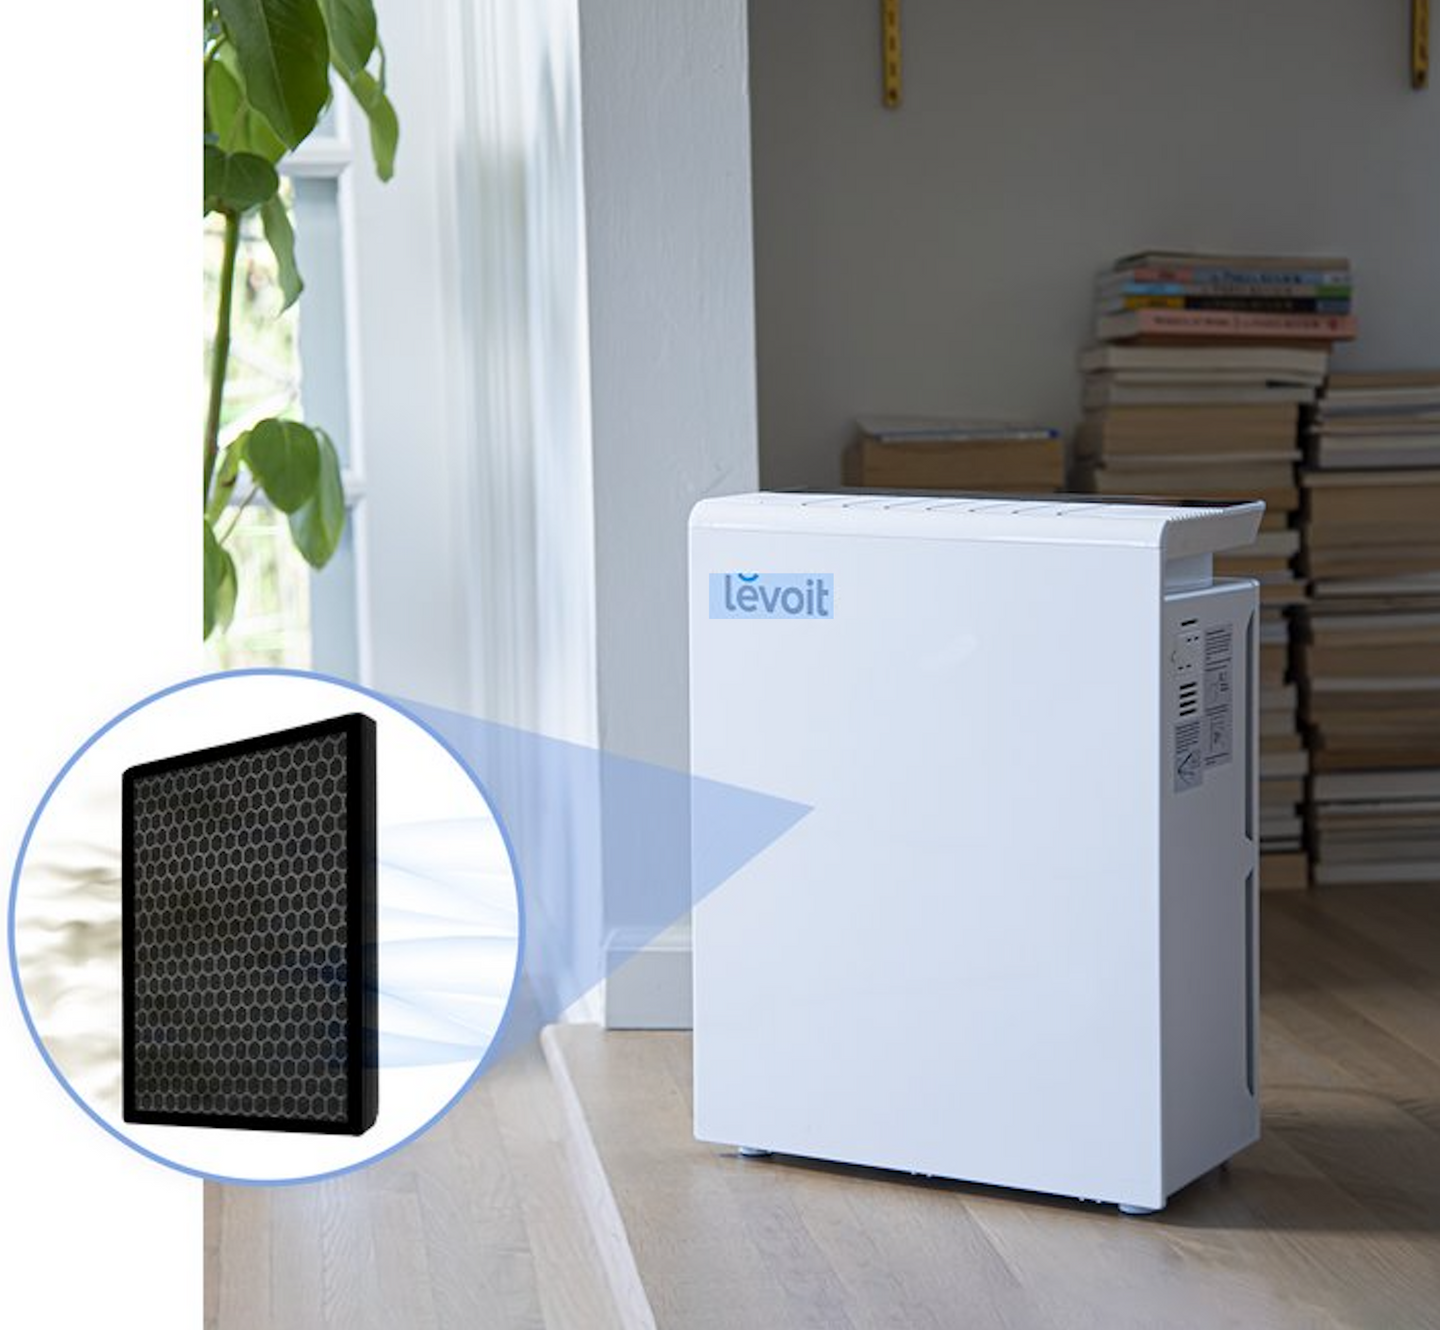 Hands-On Levoit LV-PUR131 Air Purifier Review: Good Quality & Adequate, But  Better Options Exist